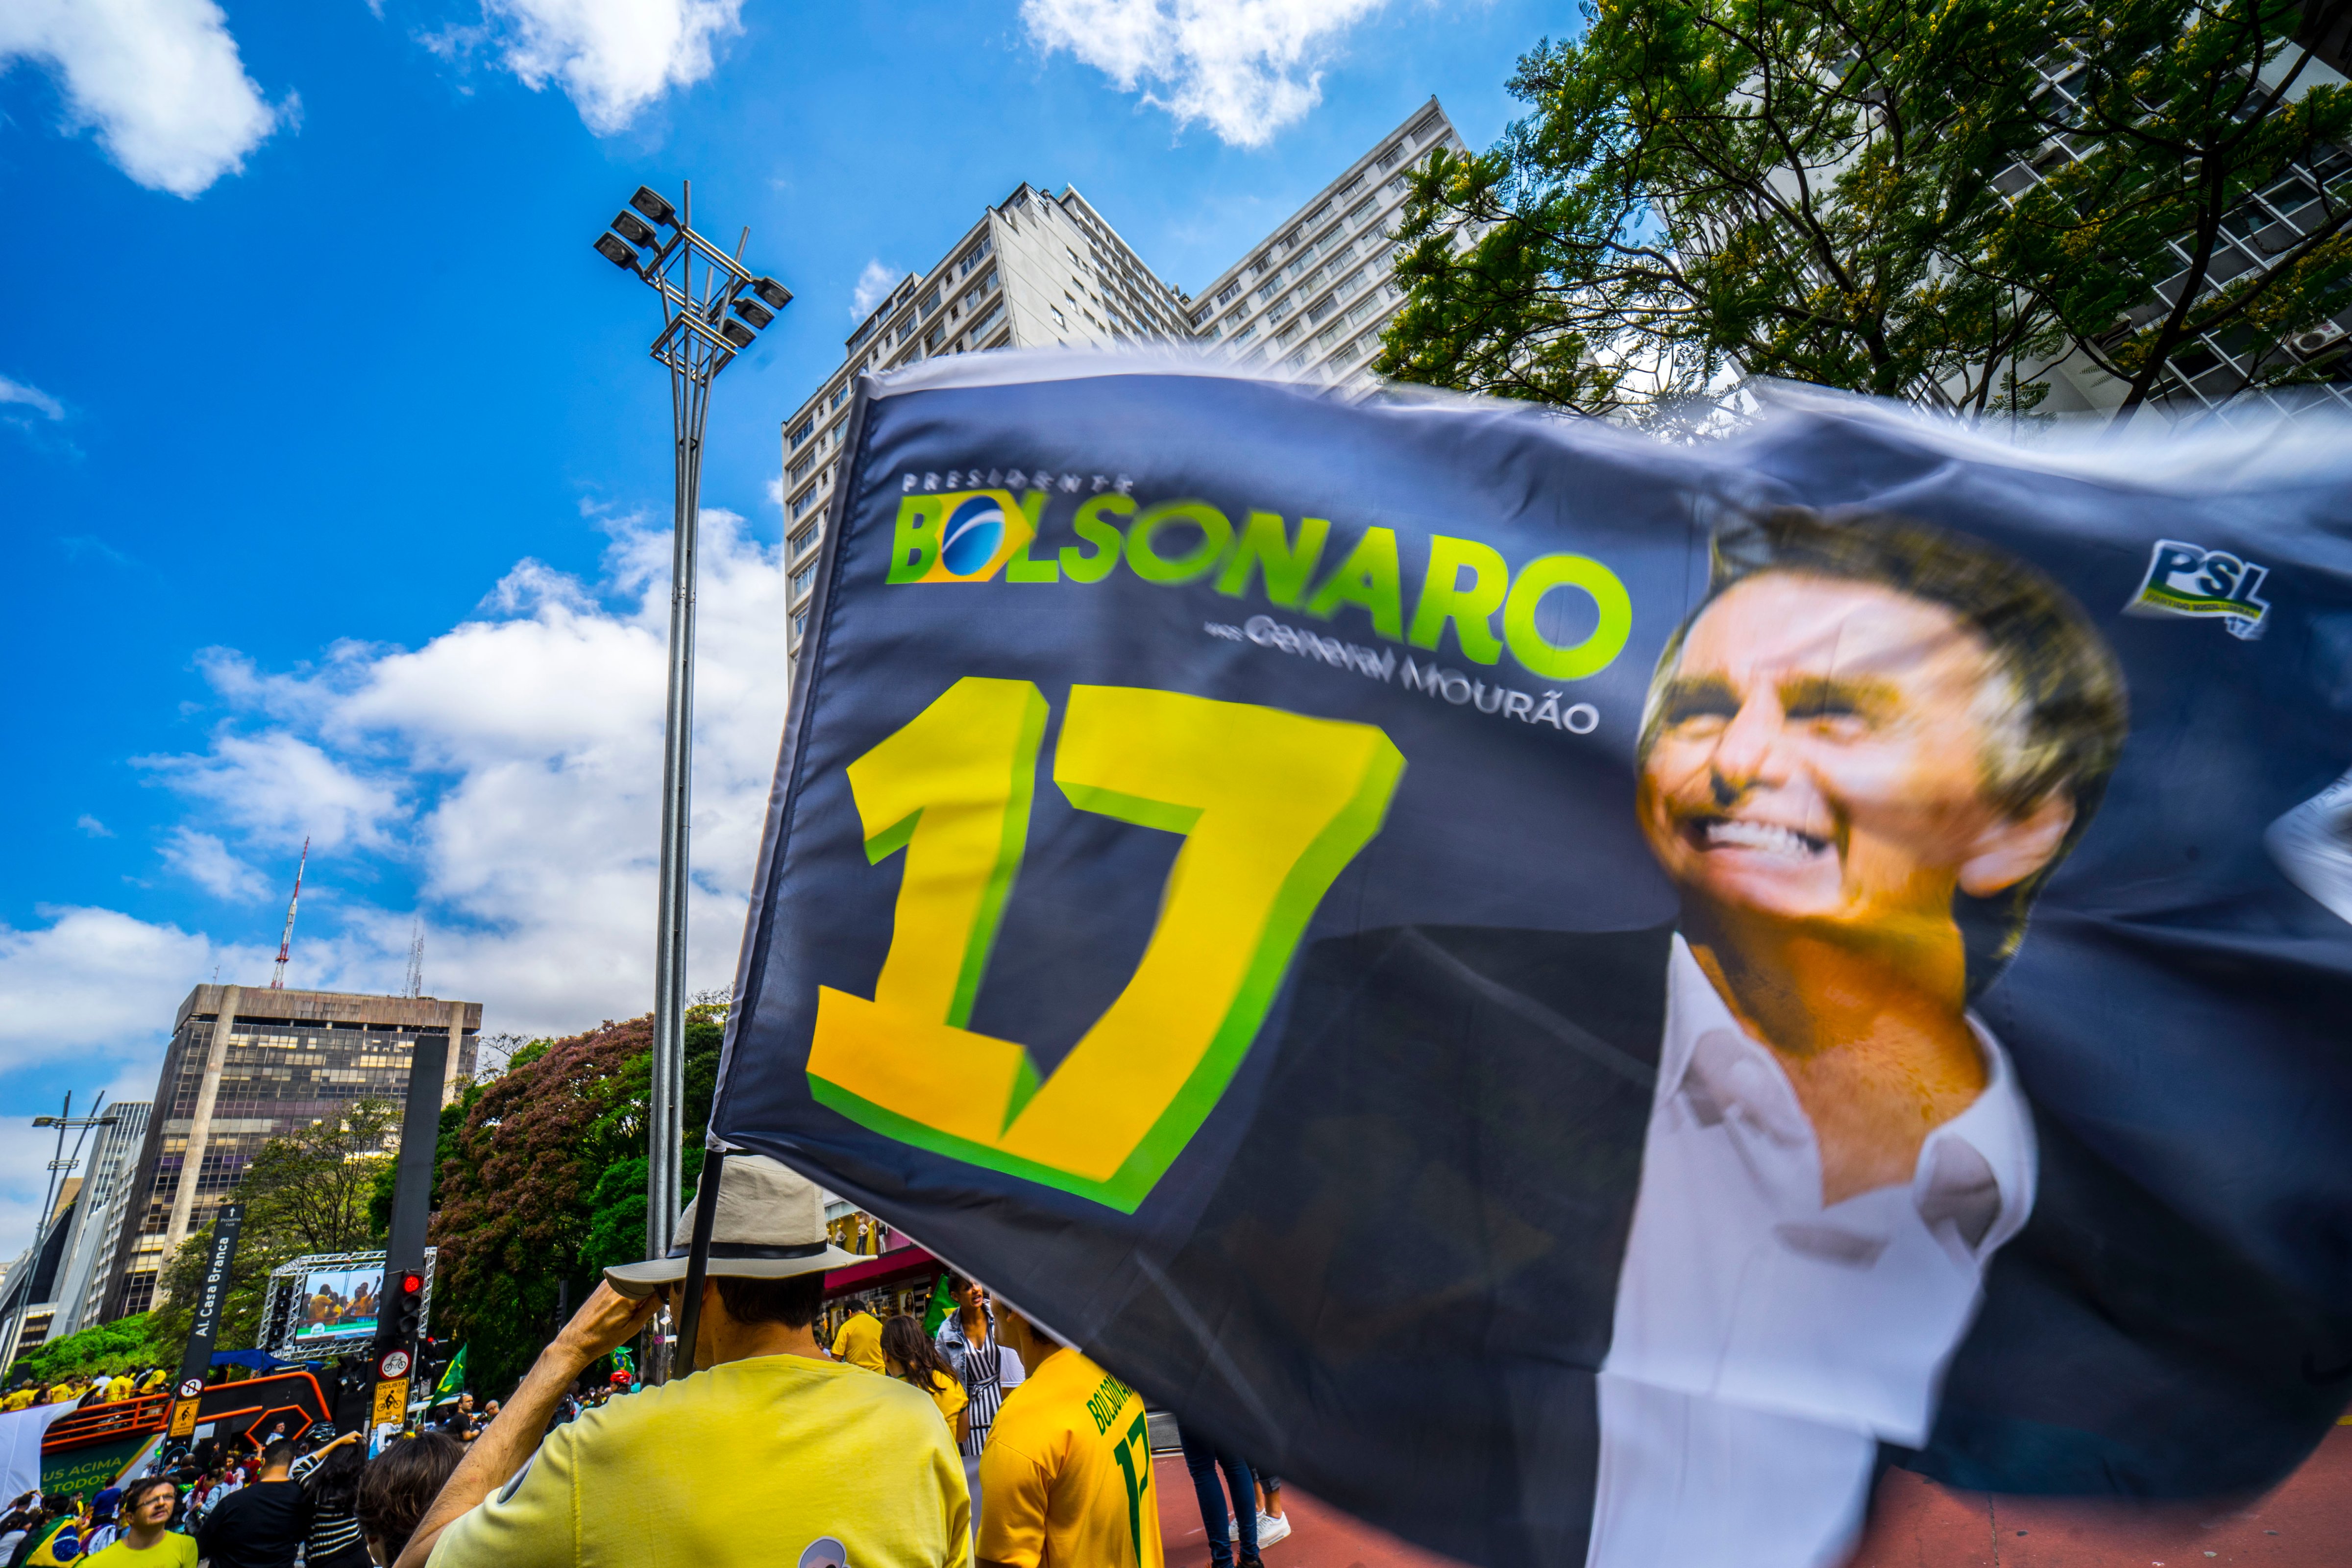 Supporters of Brazilian right-wing presidential candidate Jair Bolsonaro take part in a rally along Paulista Avenue in Sao Paulo Brazil on October 21 2018. - Barring any last-minute upset, Brazil appears poised to elect Jair Bolsonaro, a populist far-right veteran politician, as its next president in a week's time. (NurPhoto/Getty Images)